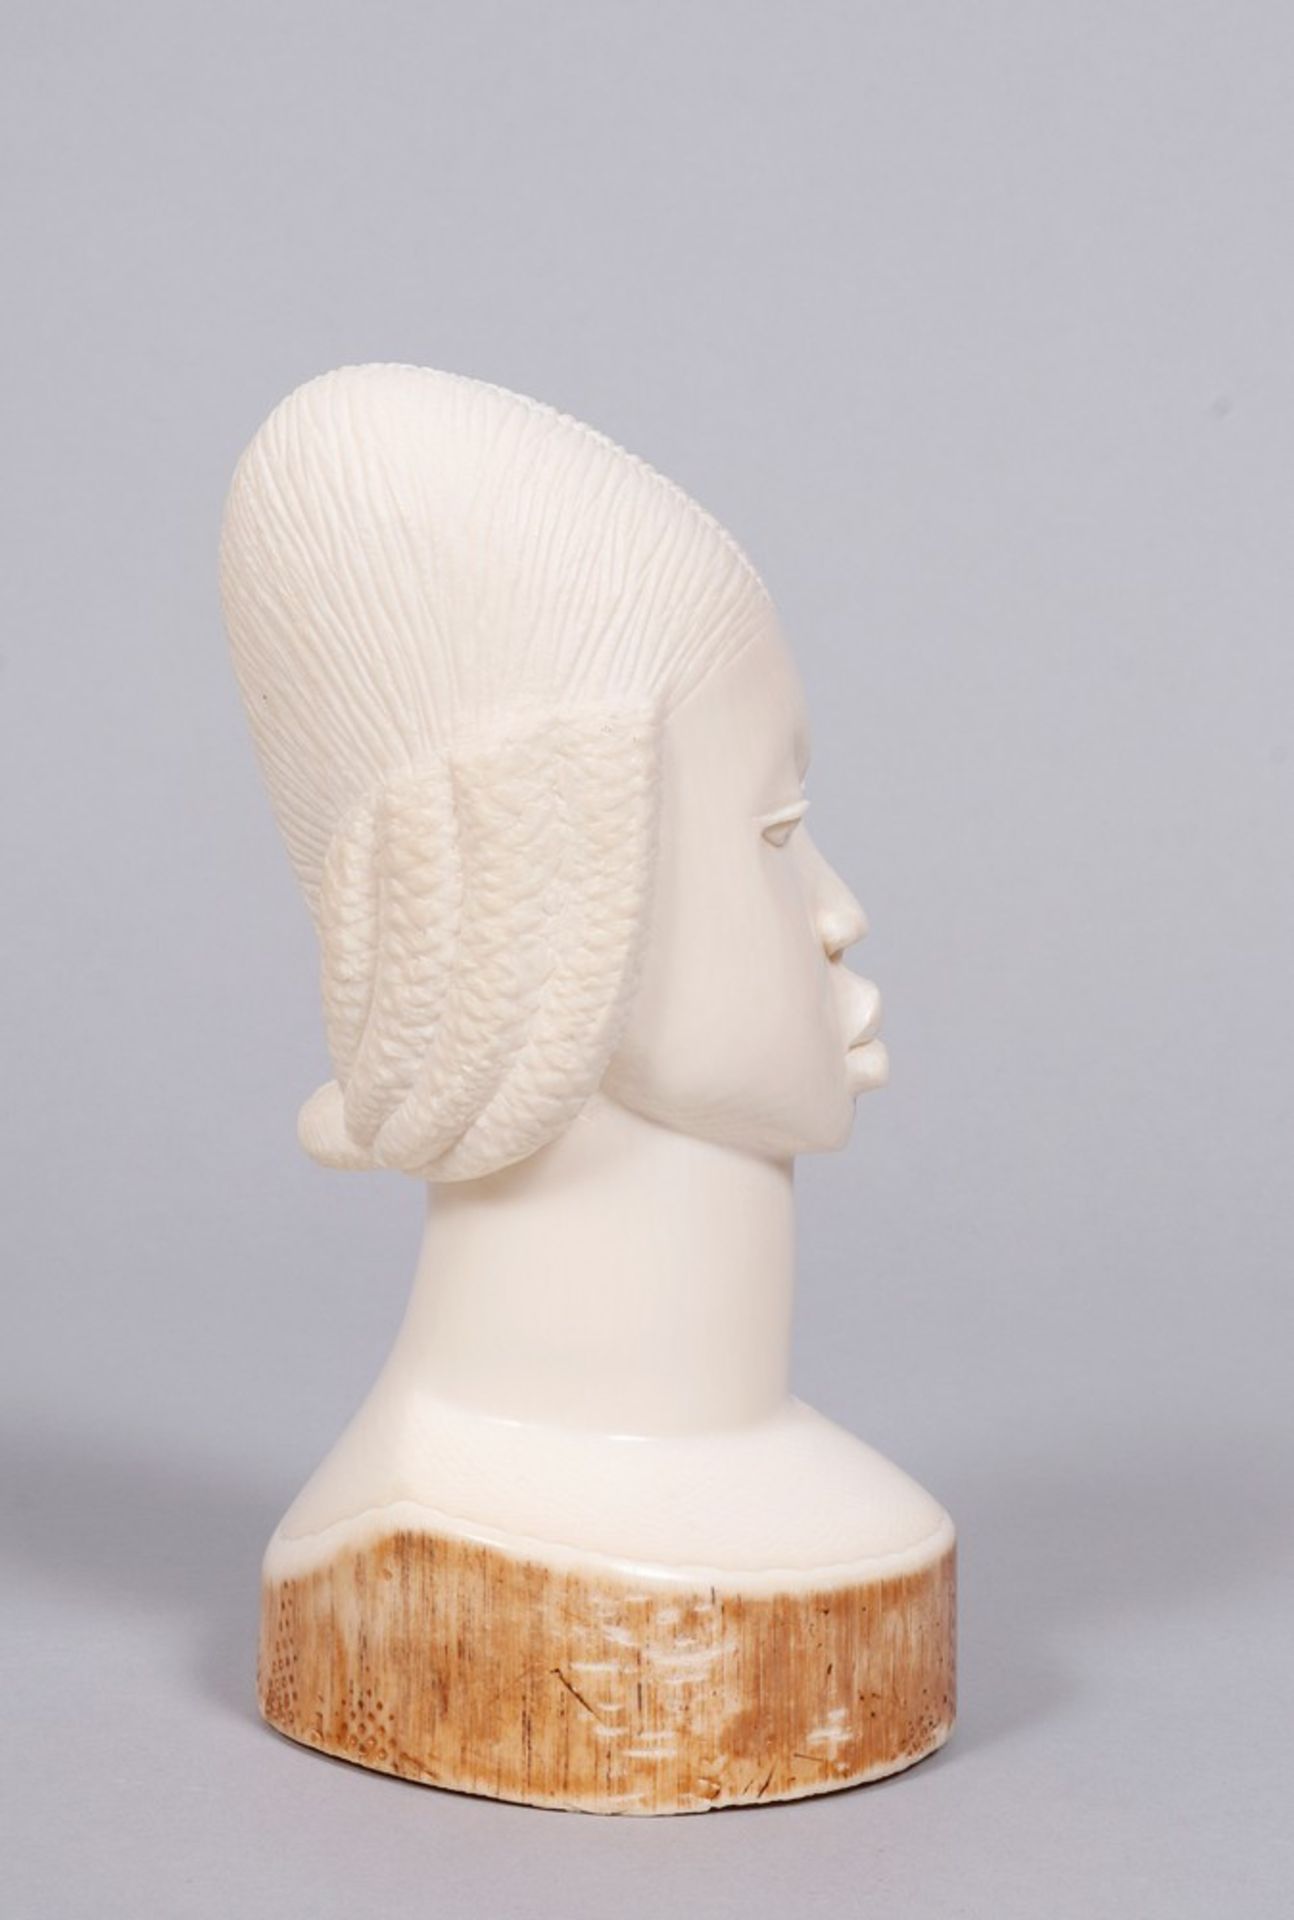 Small bust, Africa - Image 5 of 6